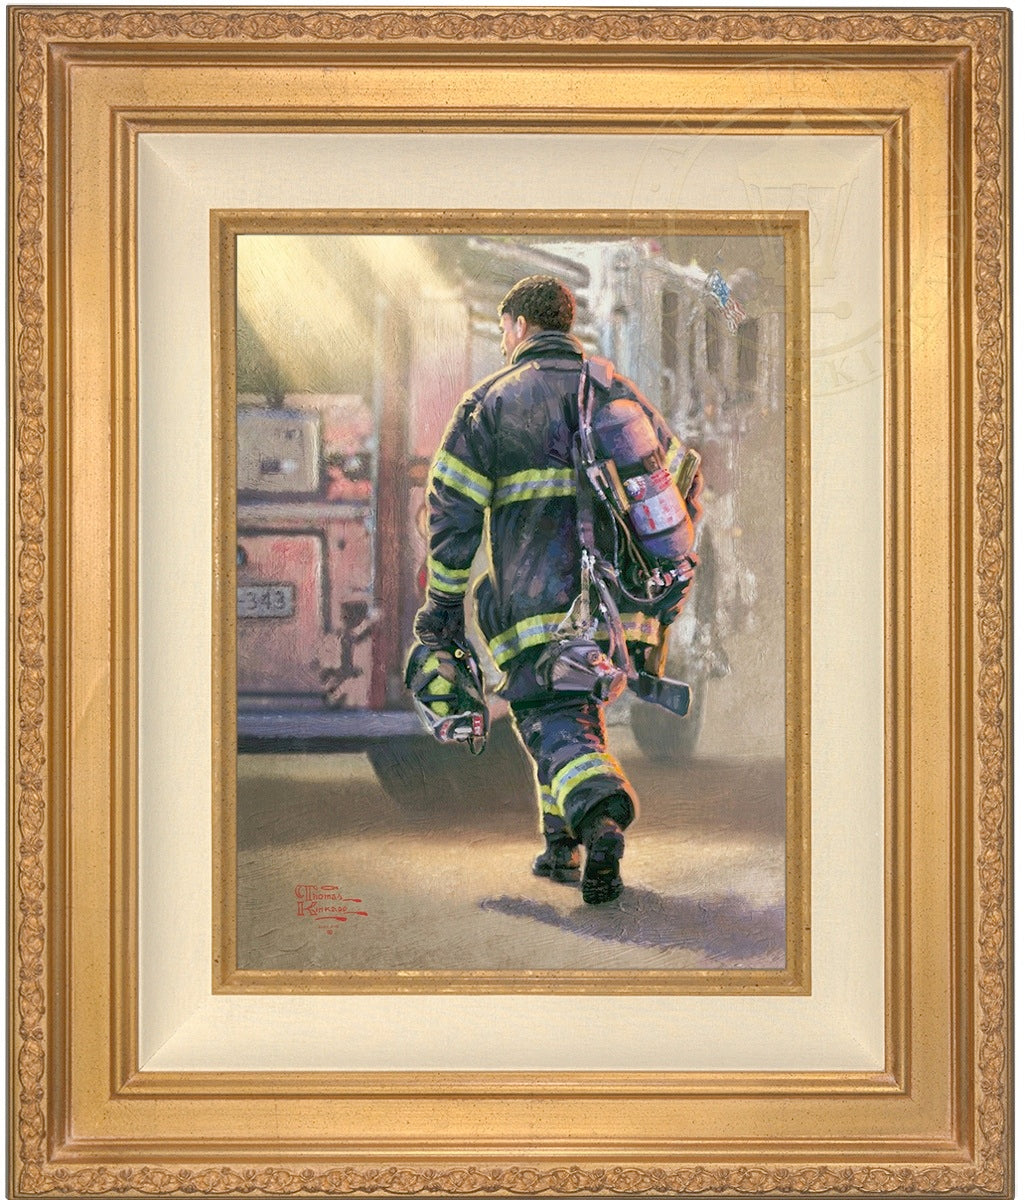 Shop Premium Art canvases for Painting for Ki at Artsy Sister.